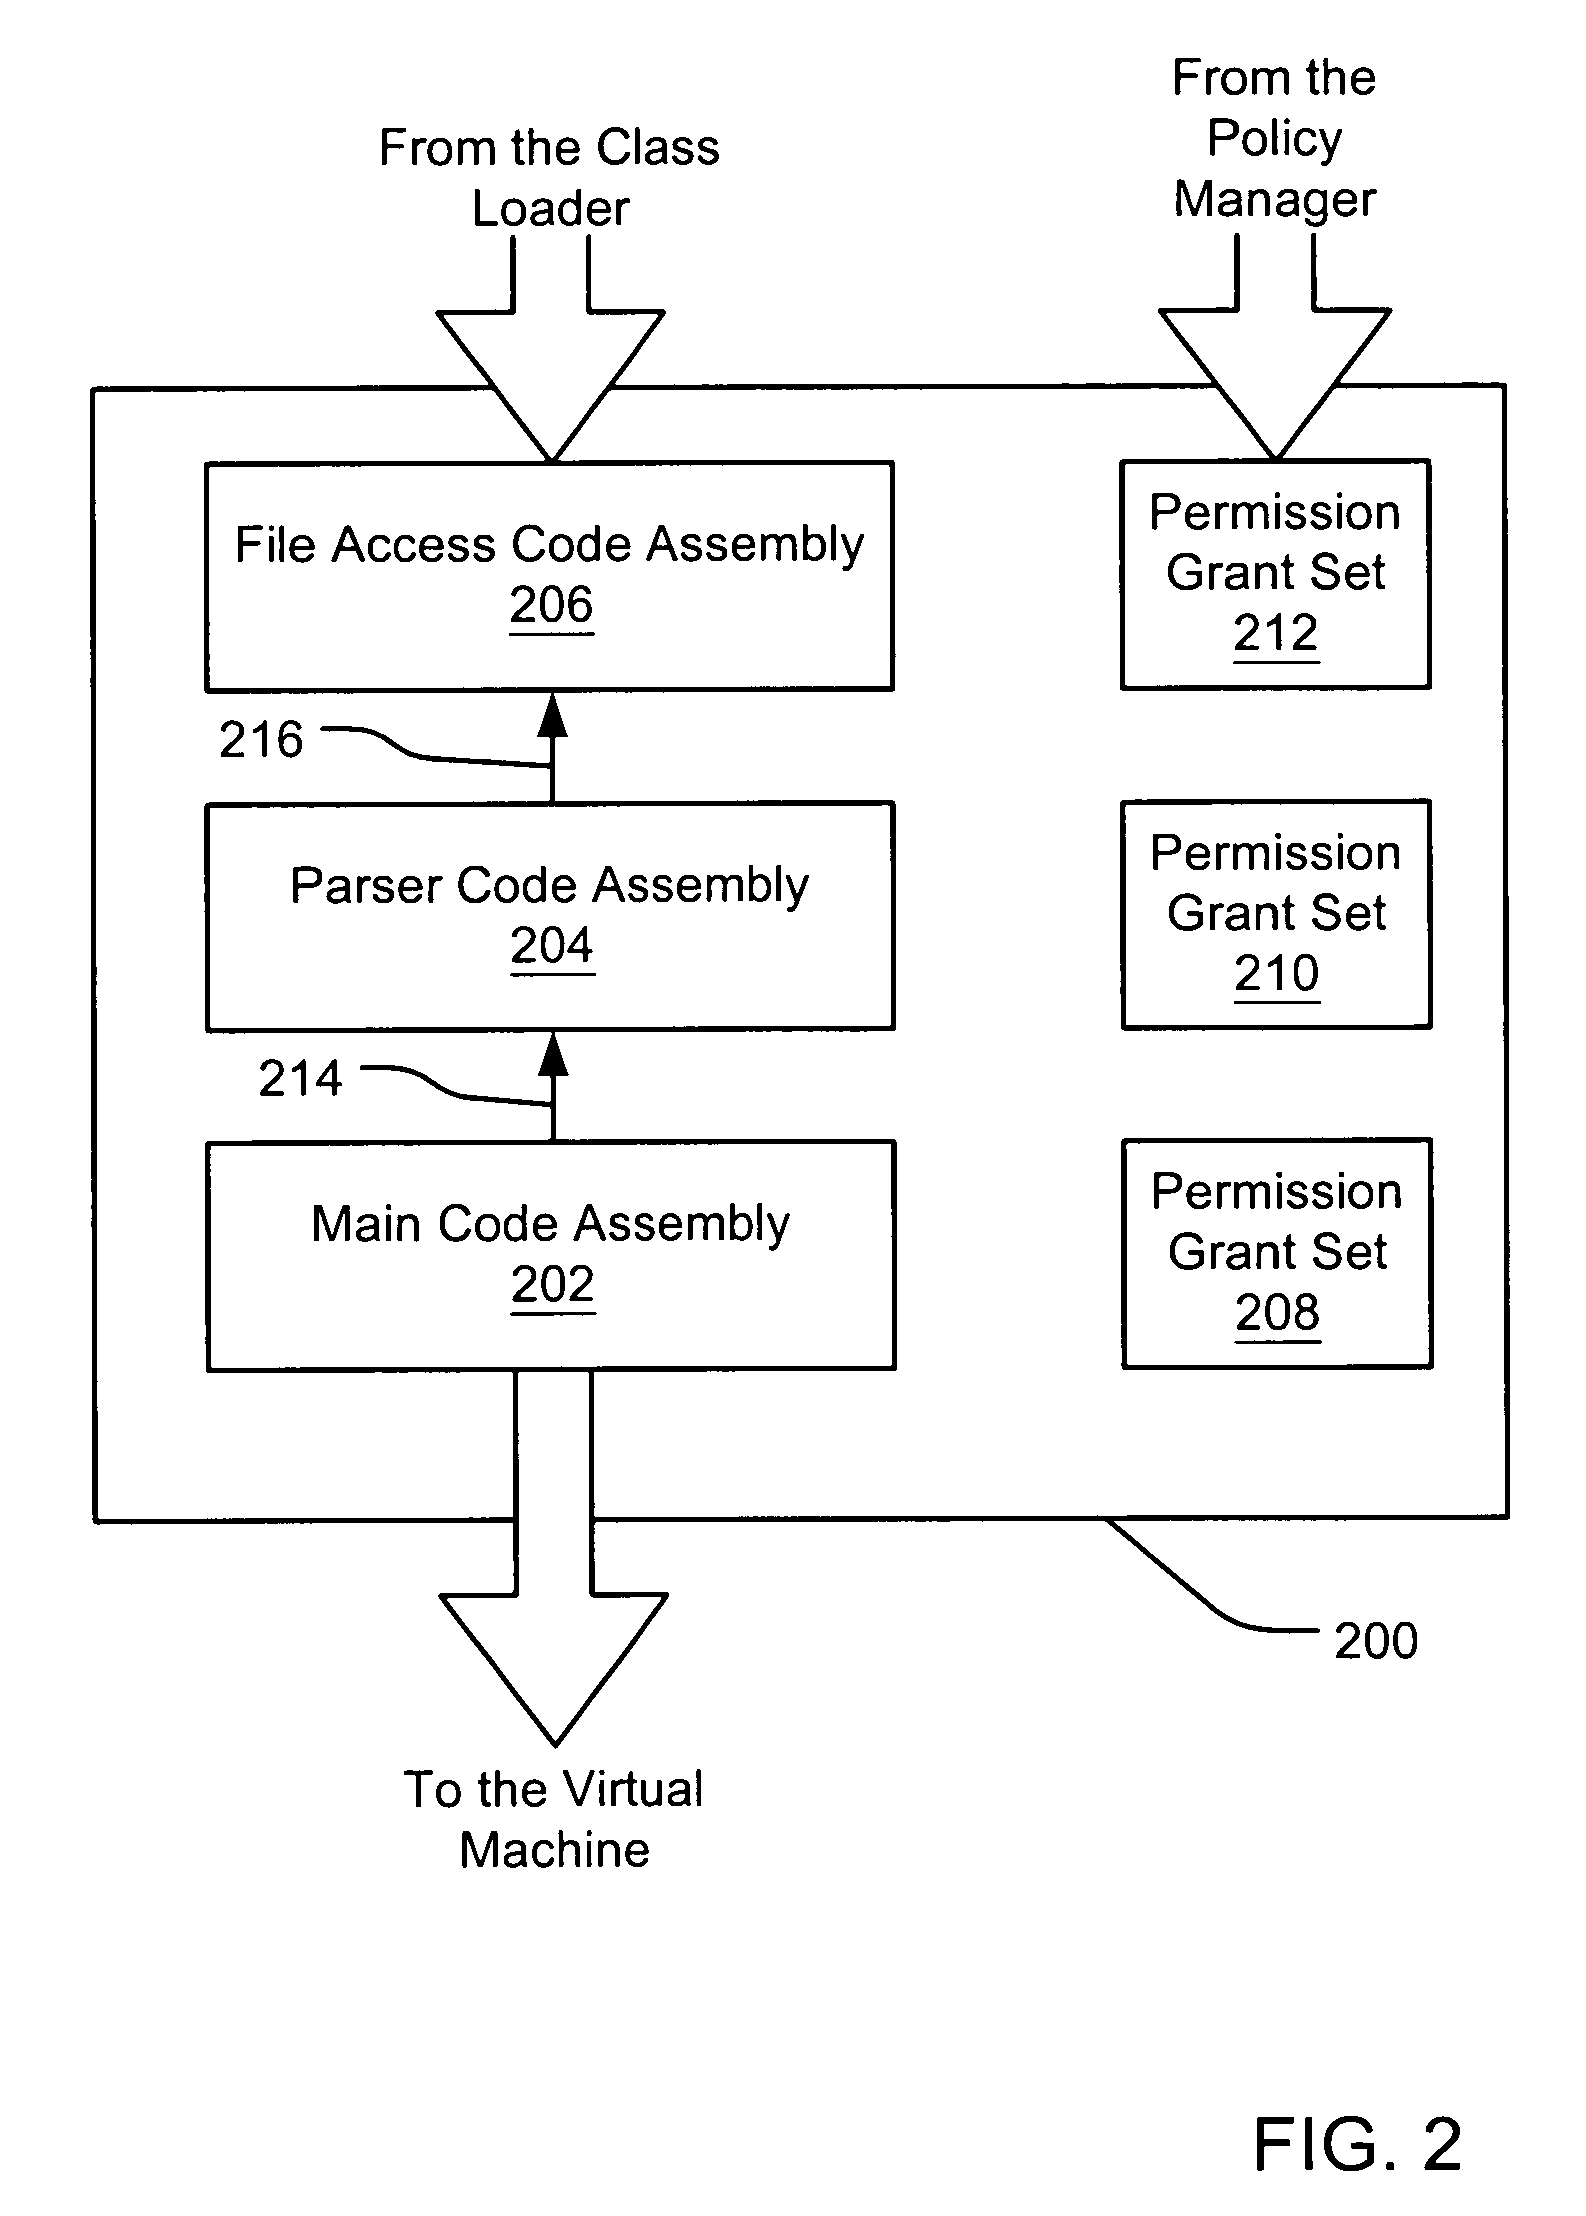 Filtering a permission set using permission requests associated with a code assembly